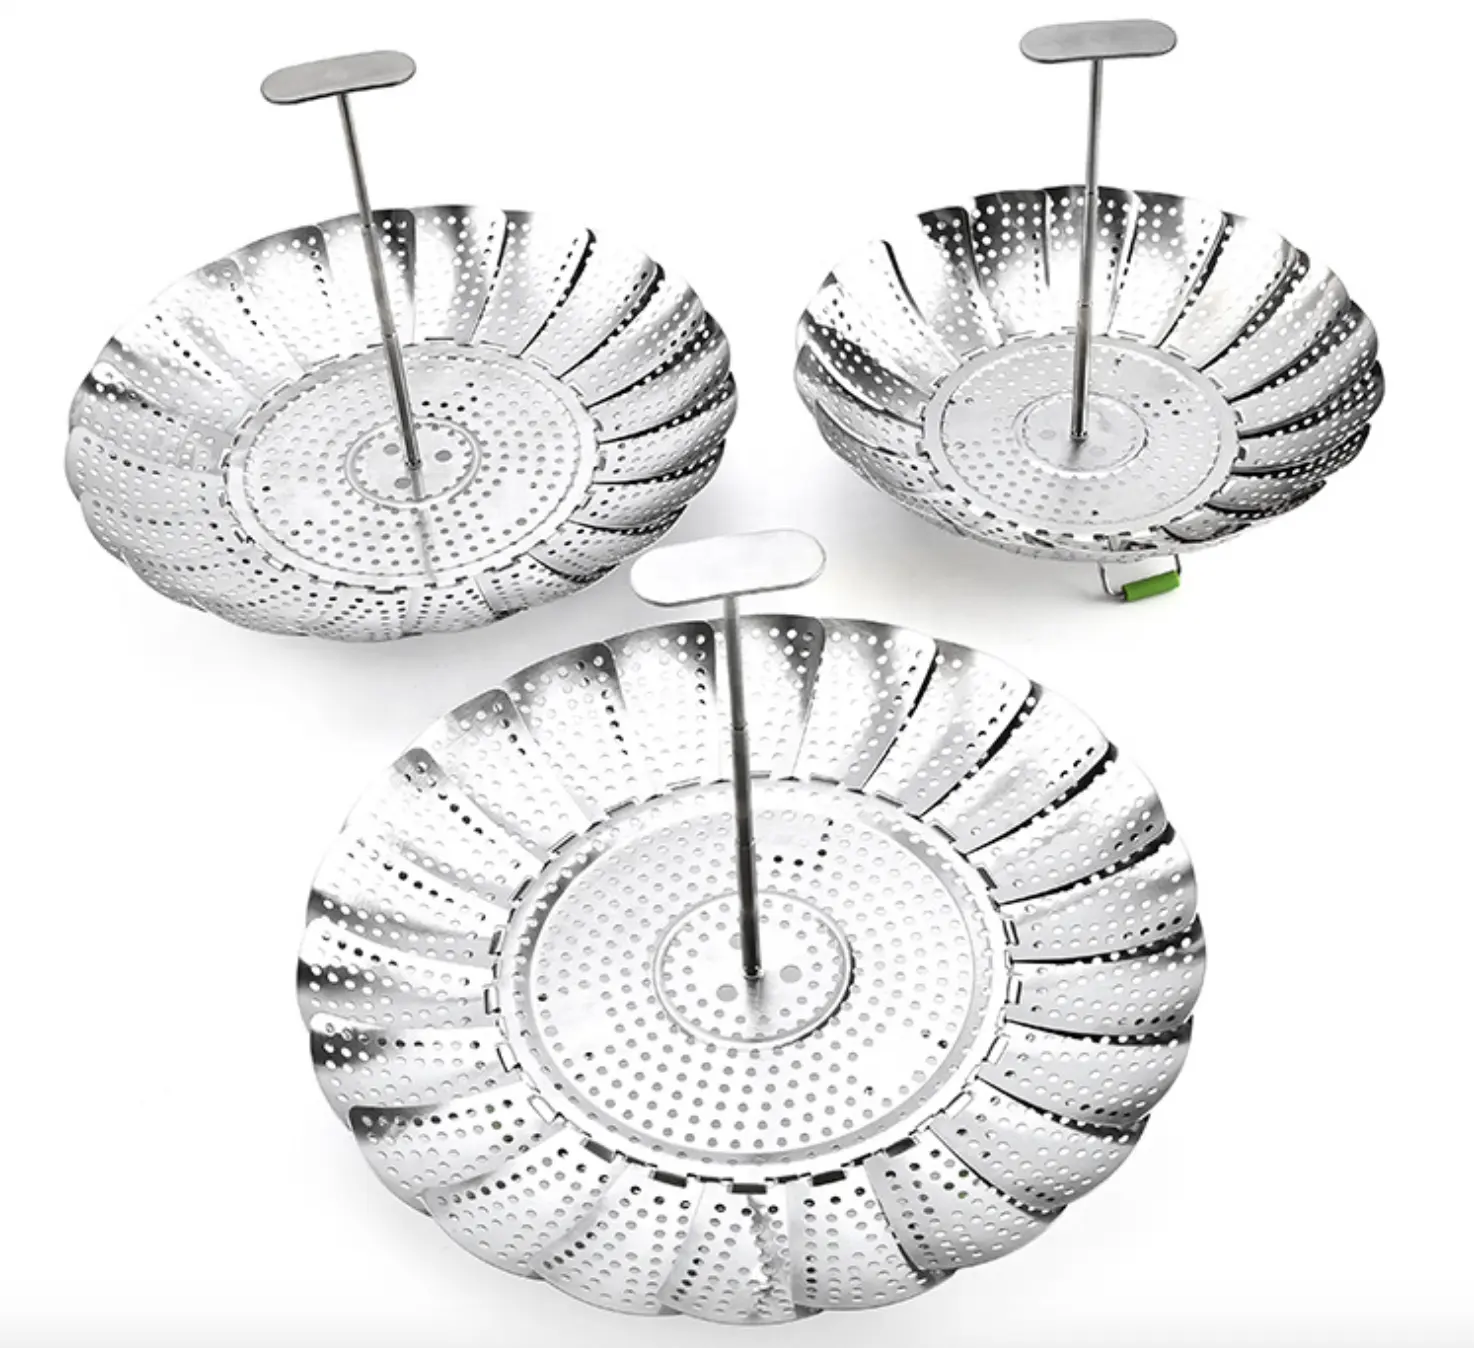 Hot Sale Steamer Basket Stainless Steel Vegetable Steamer Basket Folding Steamer Expandable to Fit Various Size Pot